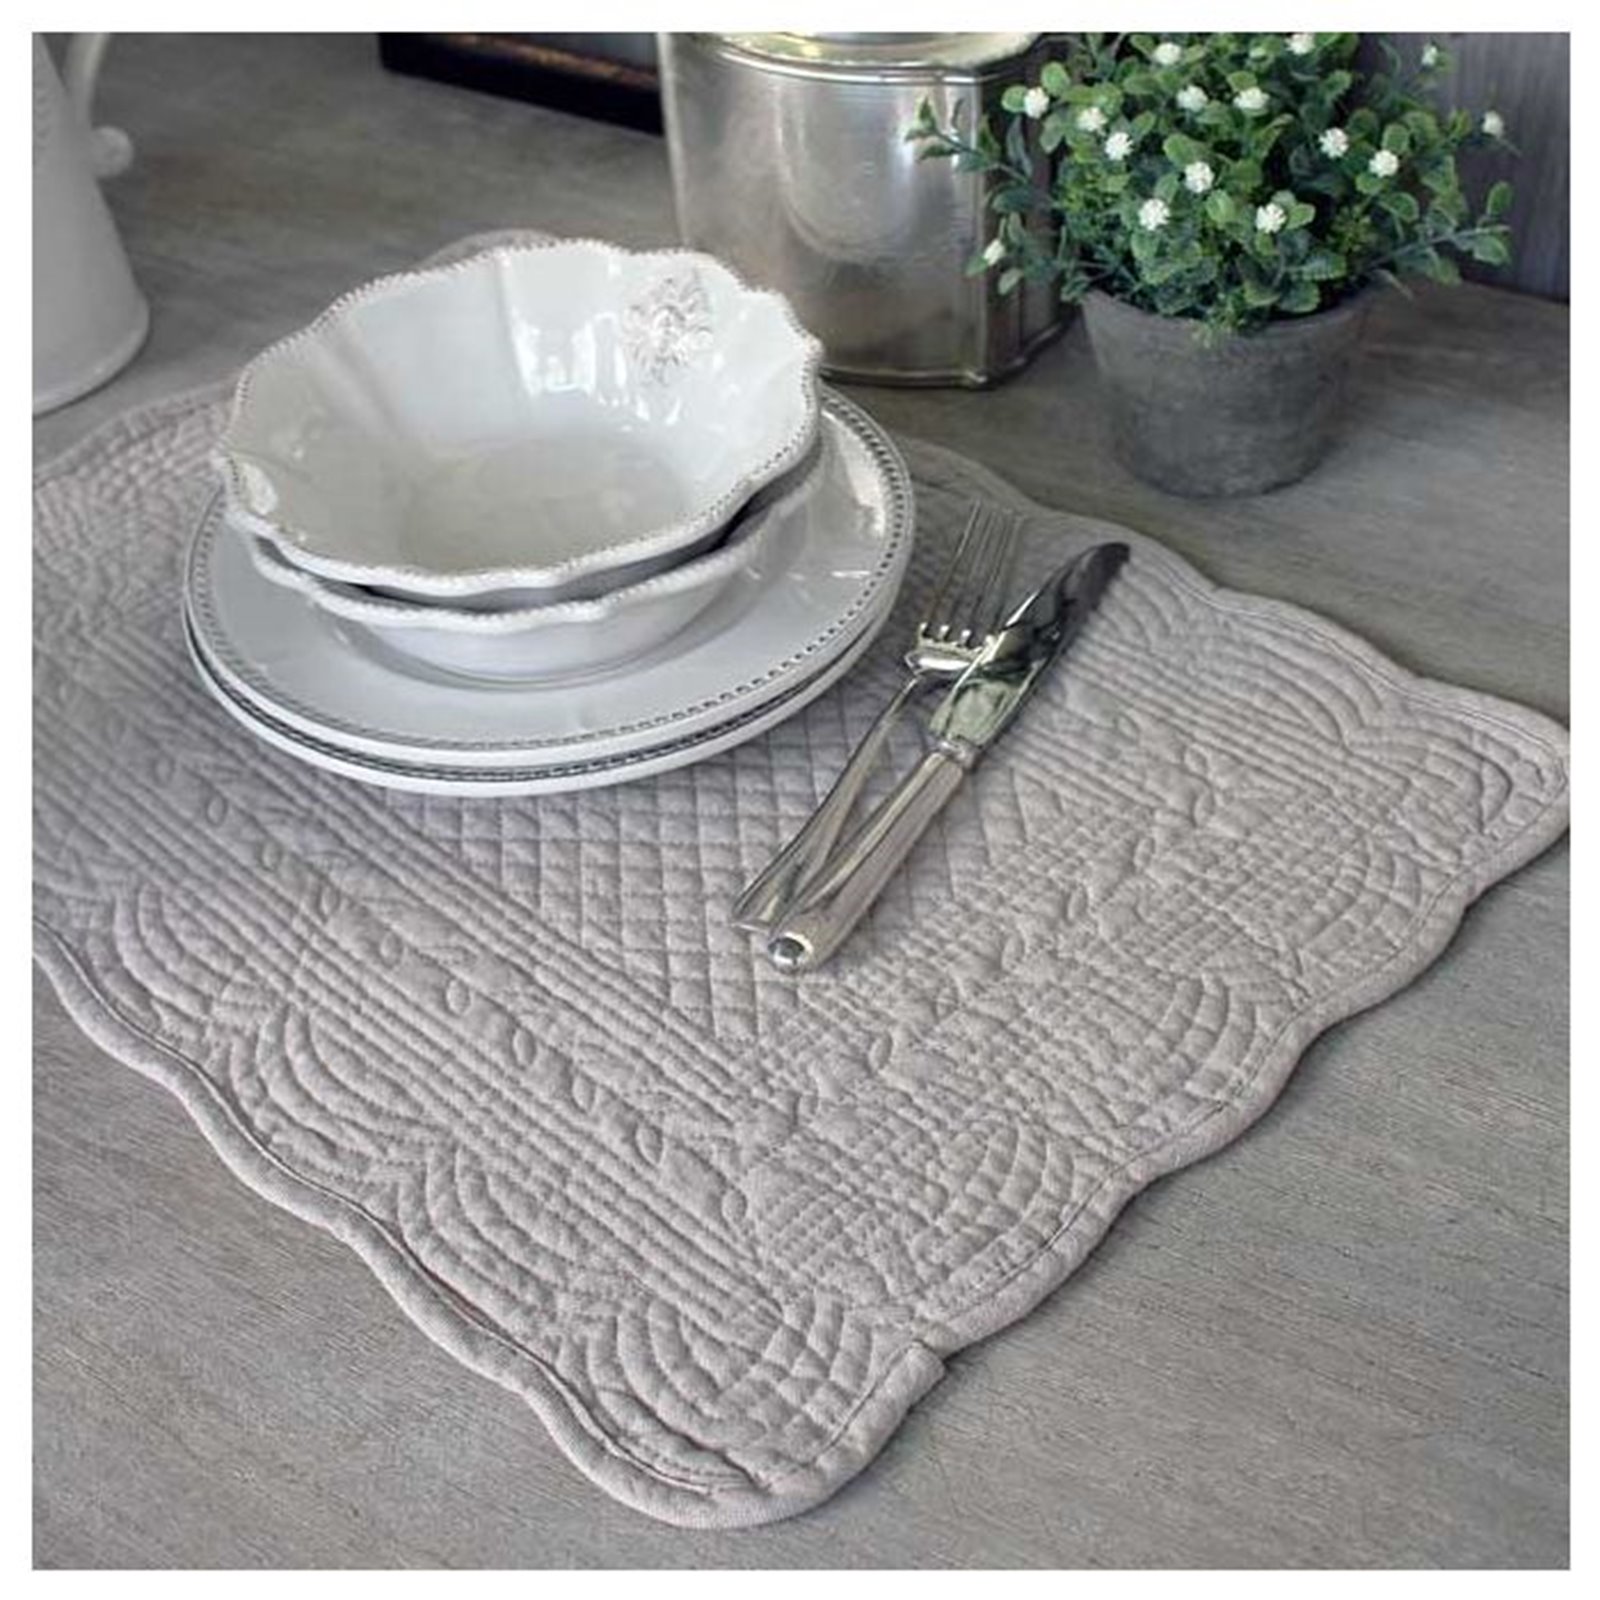 Stone quilted placemat set of 2 Image